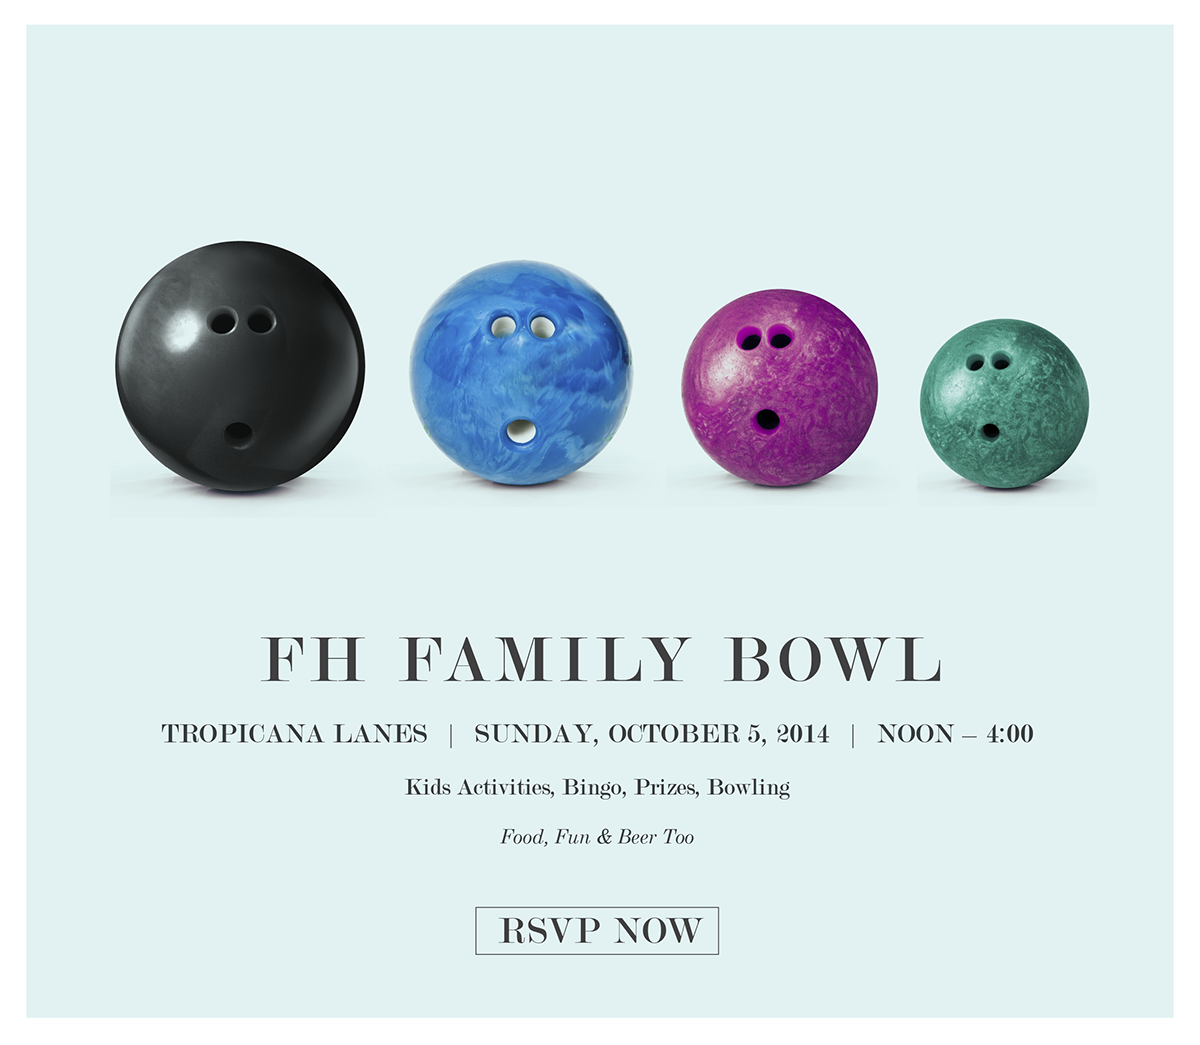 poster bowling bowl family type save the date flier flyer design ball clean simplistic